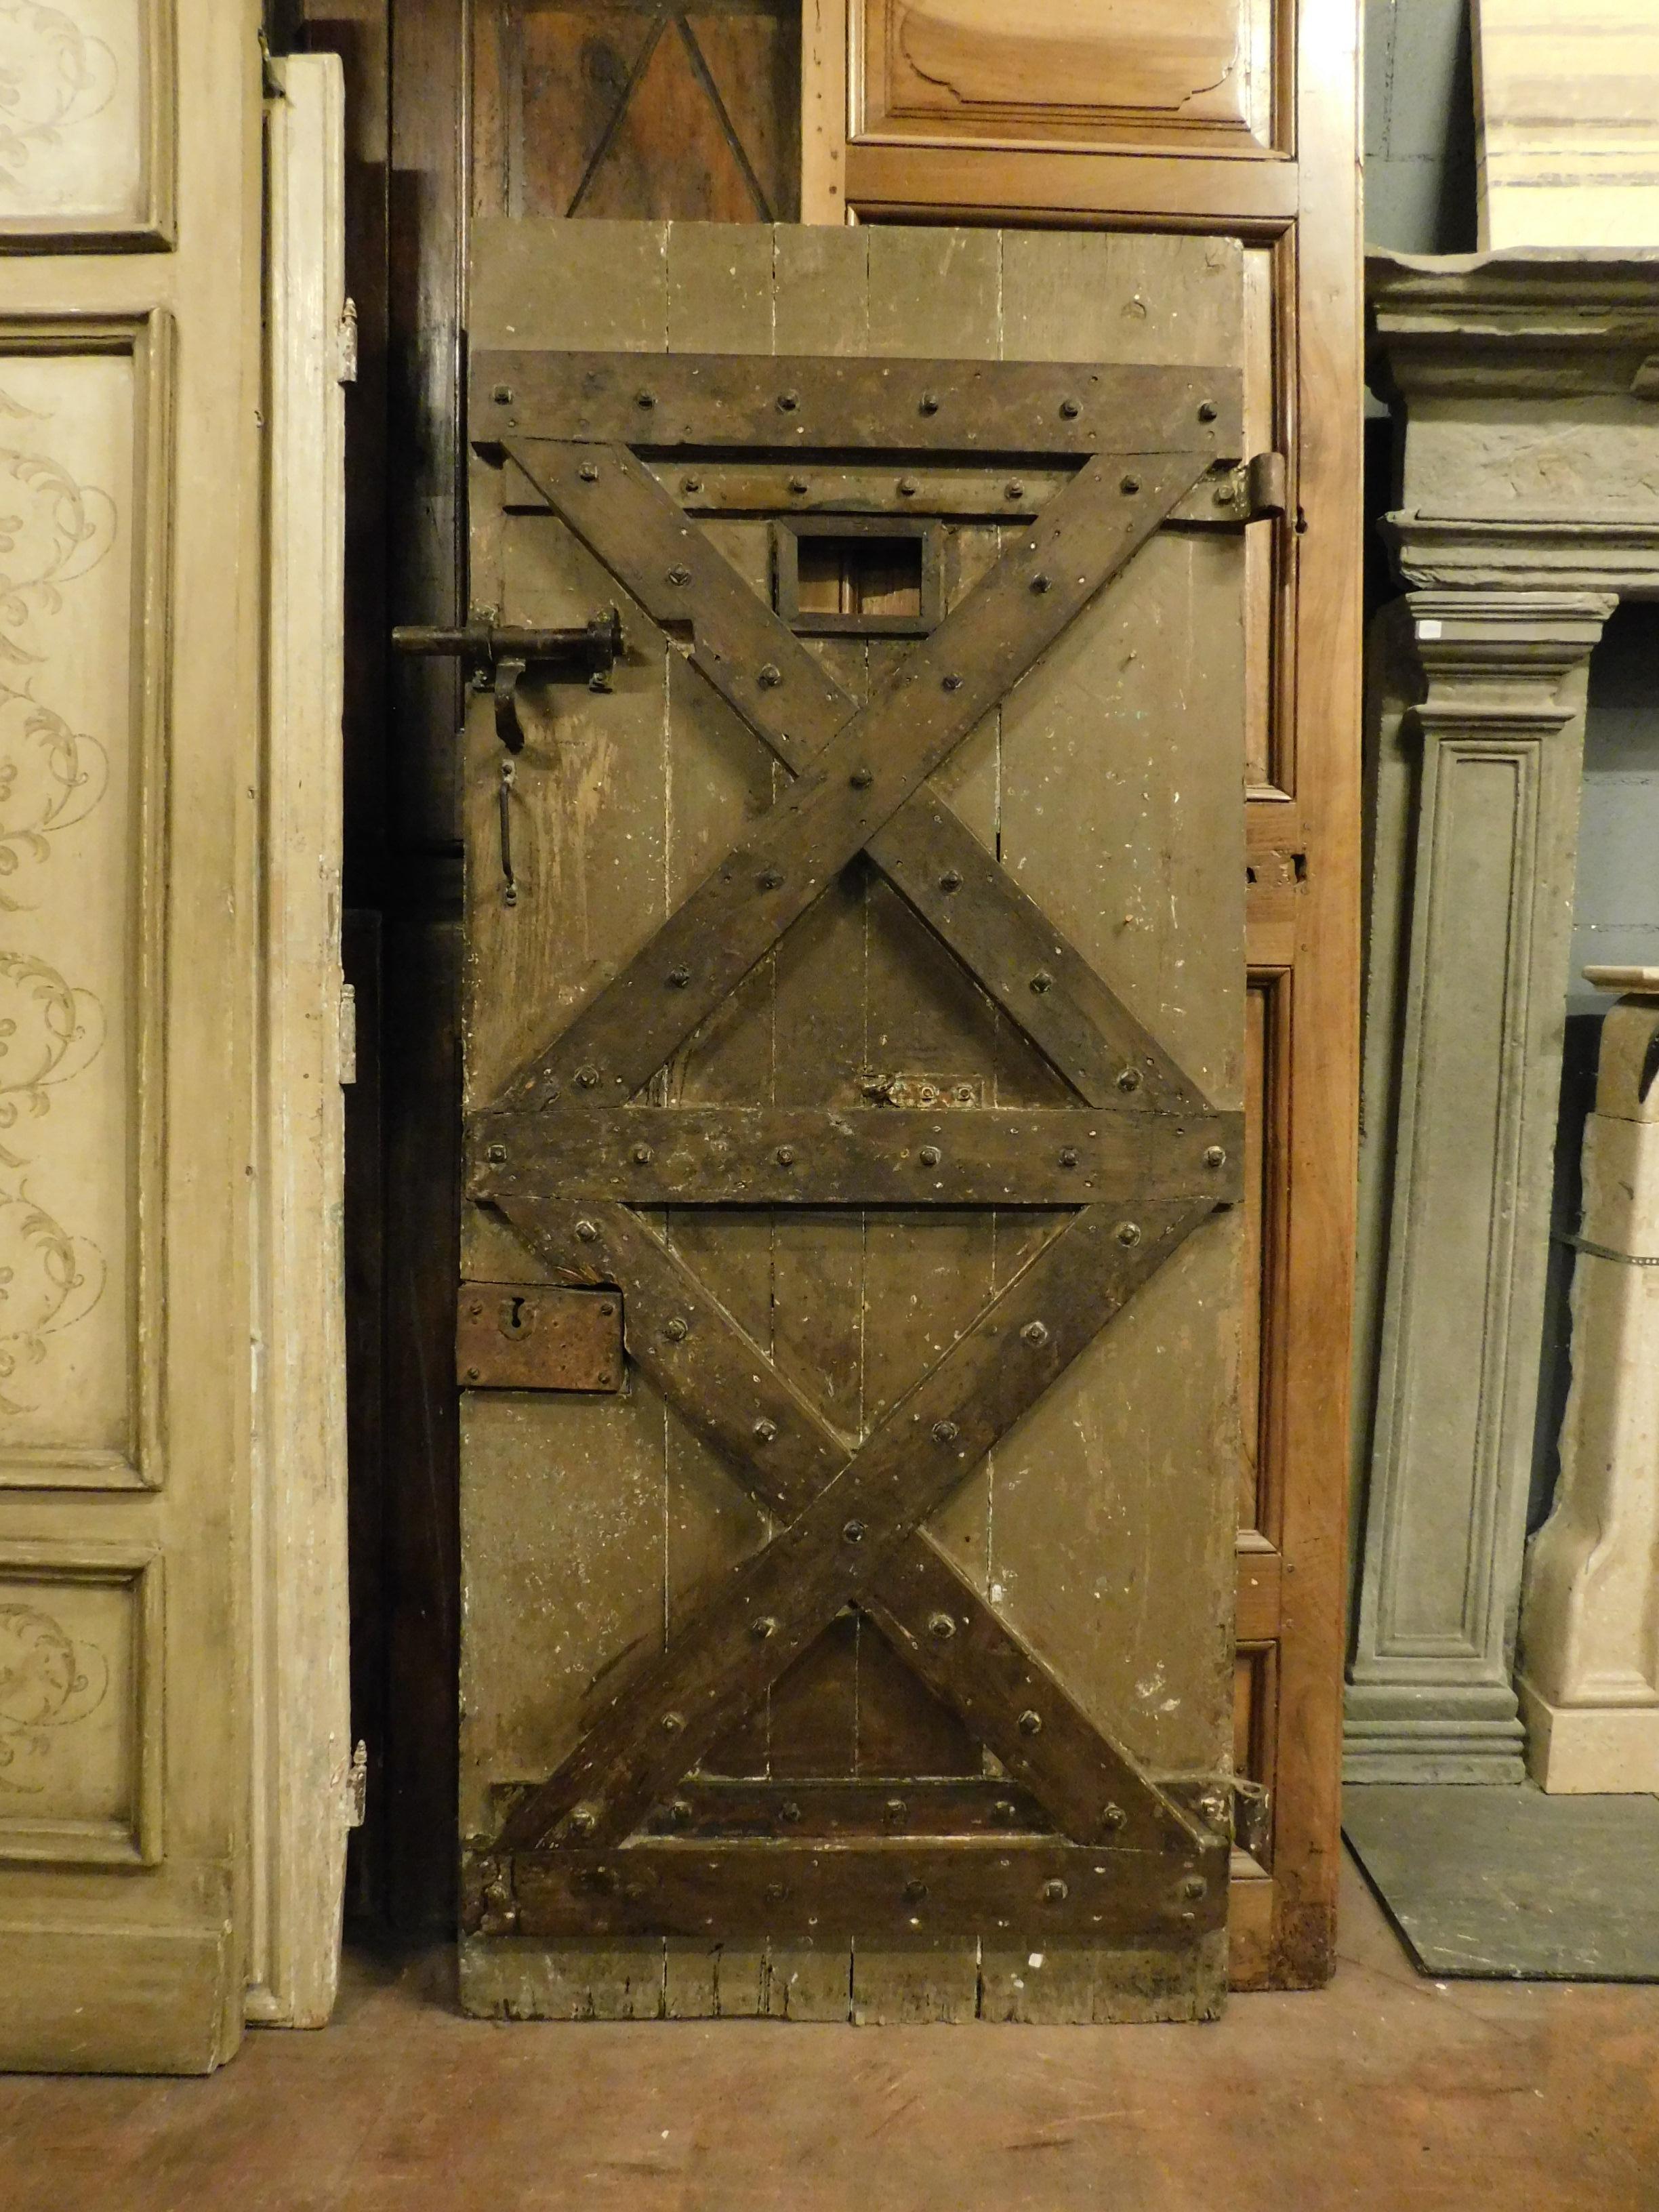 Ancient hand-lacquered prison door, in original first lacquer and with original irons (opening to pull from the right), typically sculpted with a cross on the front and a small window, built entirely by hand in the 19th century, for prison in